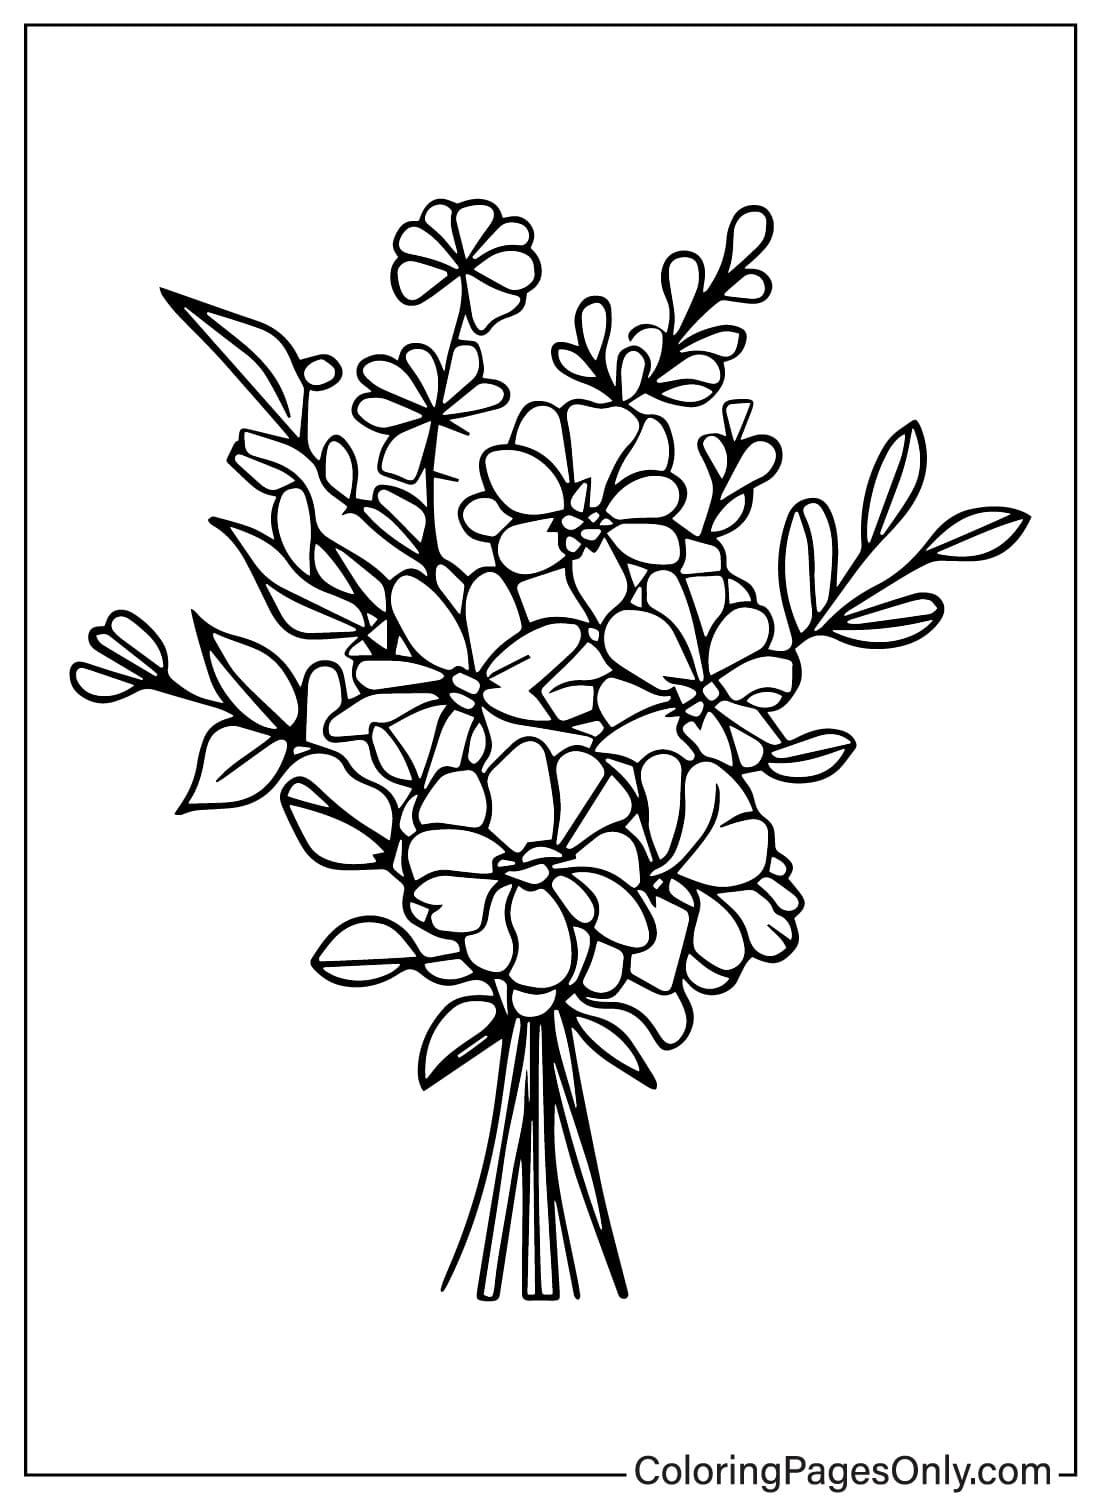 Pictures Flower Bouquet Coloring Page from Flower Bouquet